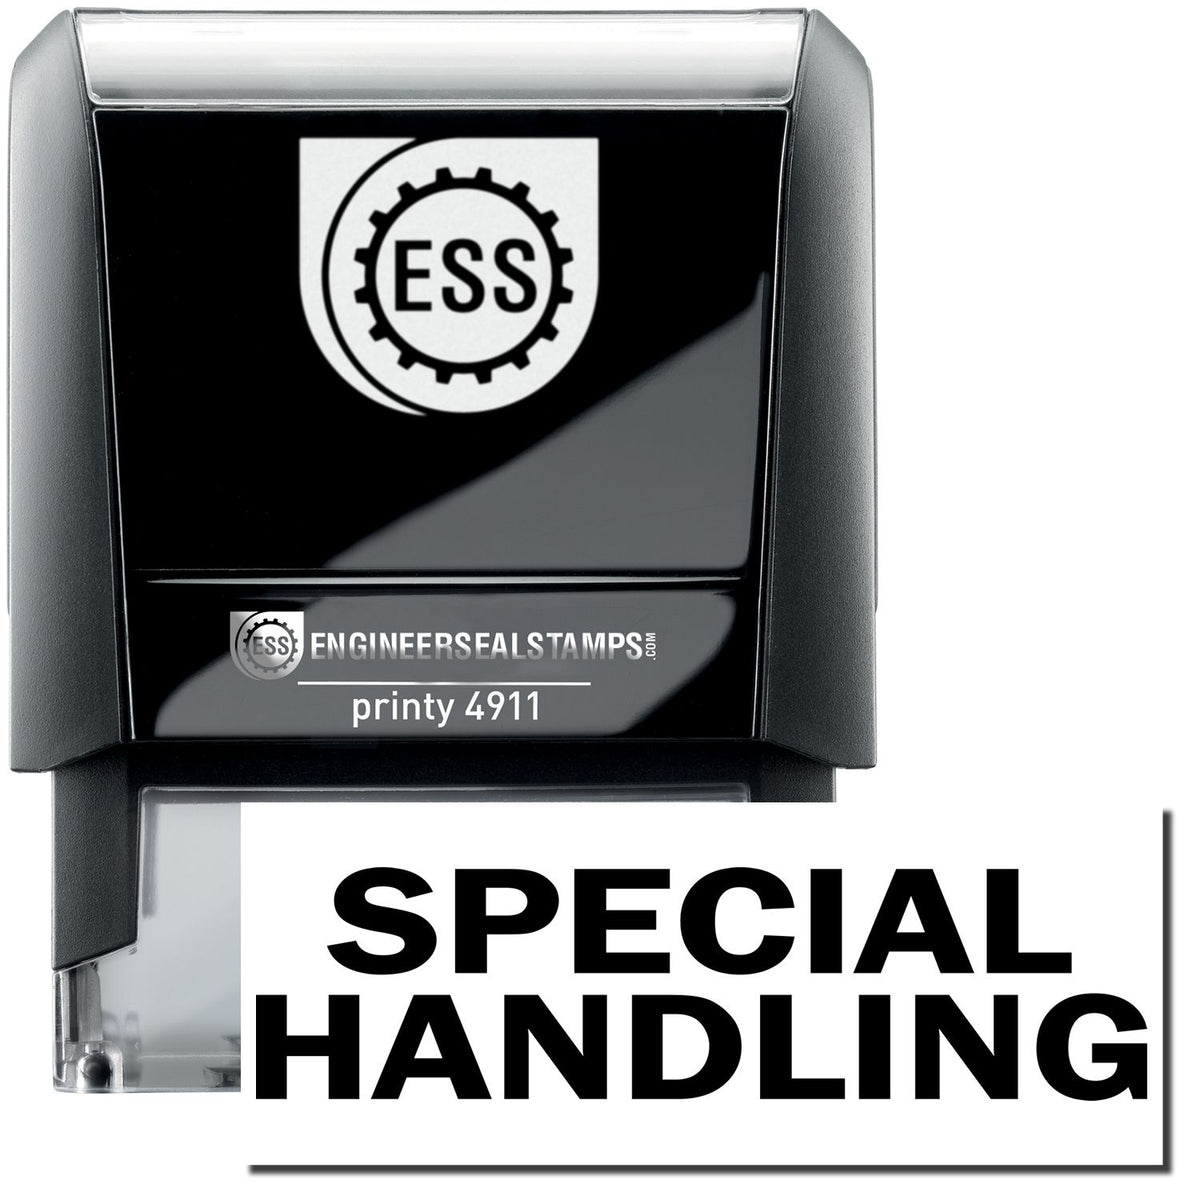 A self-inking stamp with a stamped image showing how the text &quot;SPECIAL HANDLING&quot; is displayed after stamping.